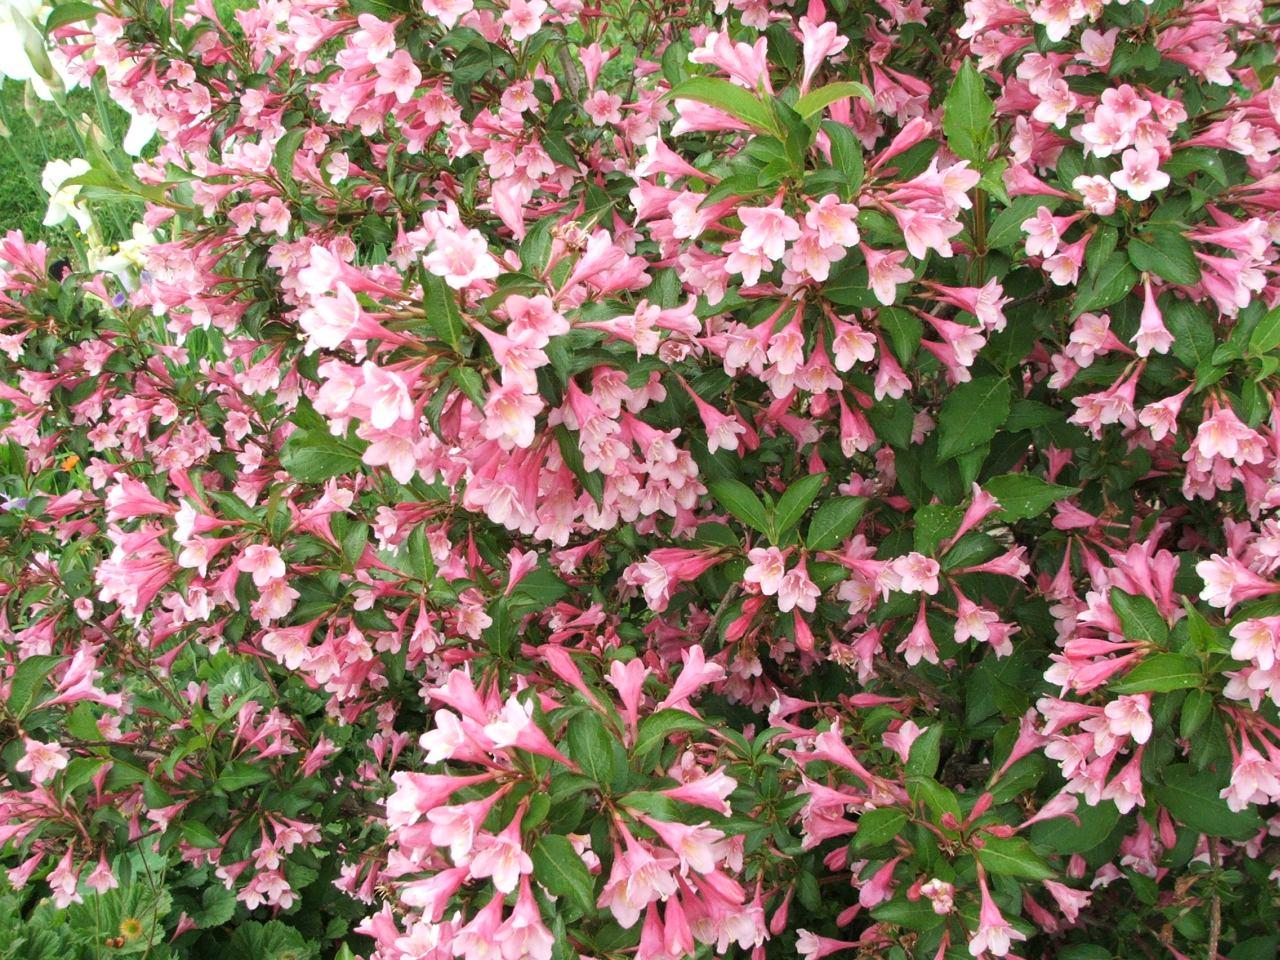 pink-white flowers with green leaves and brown stems